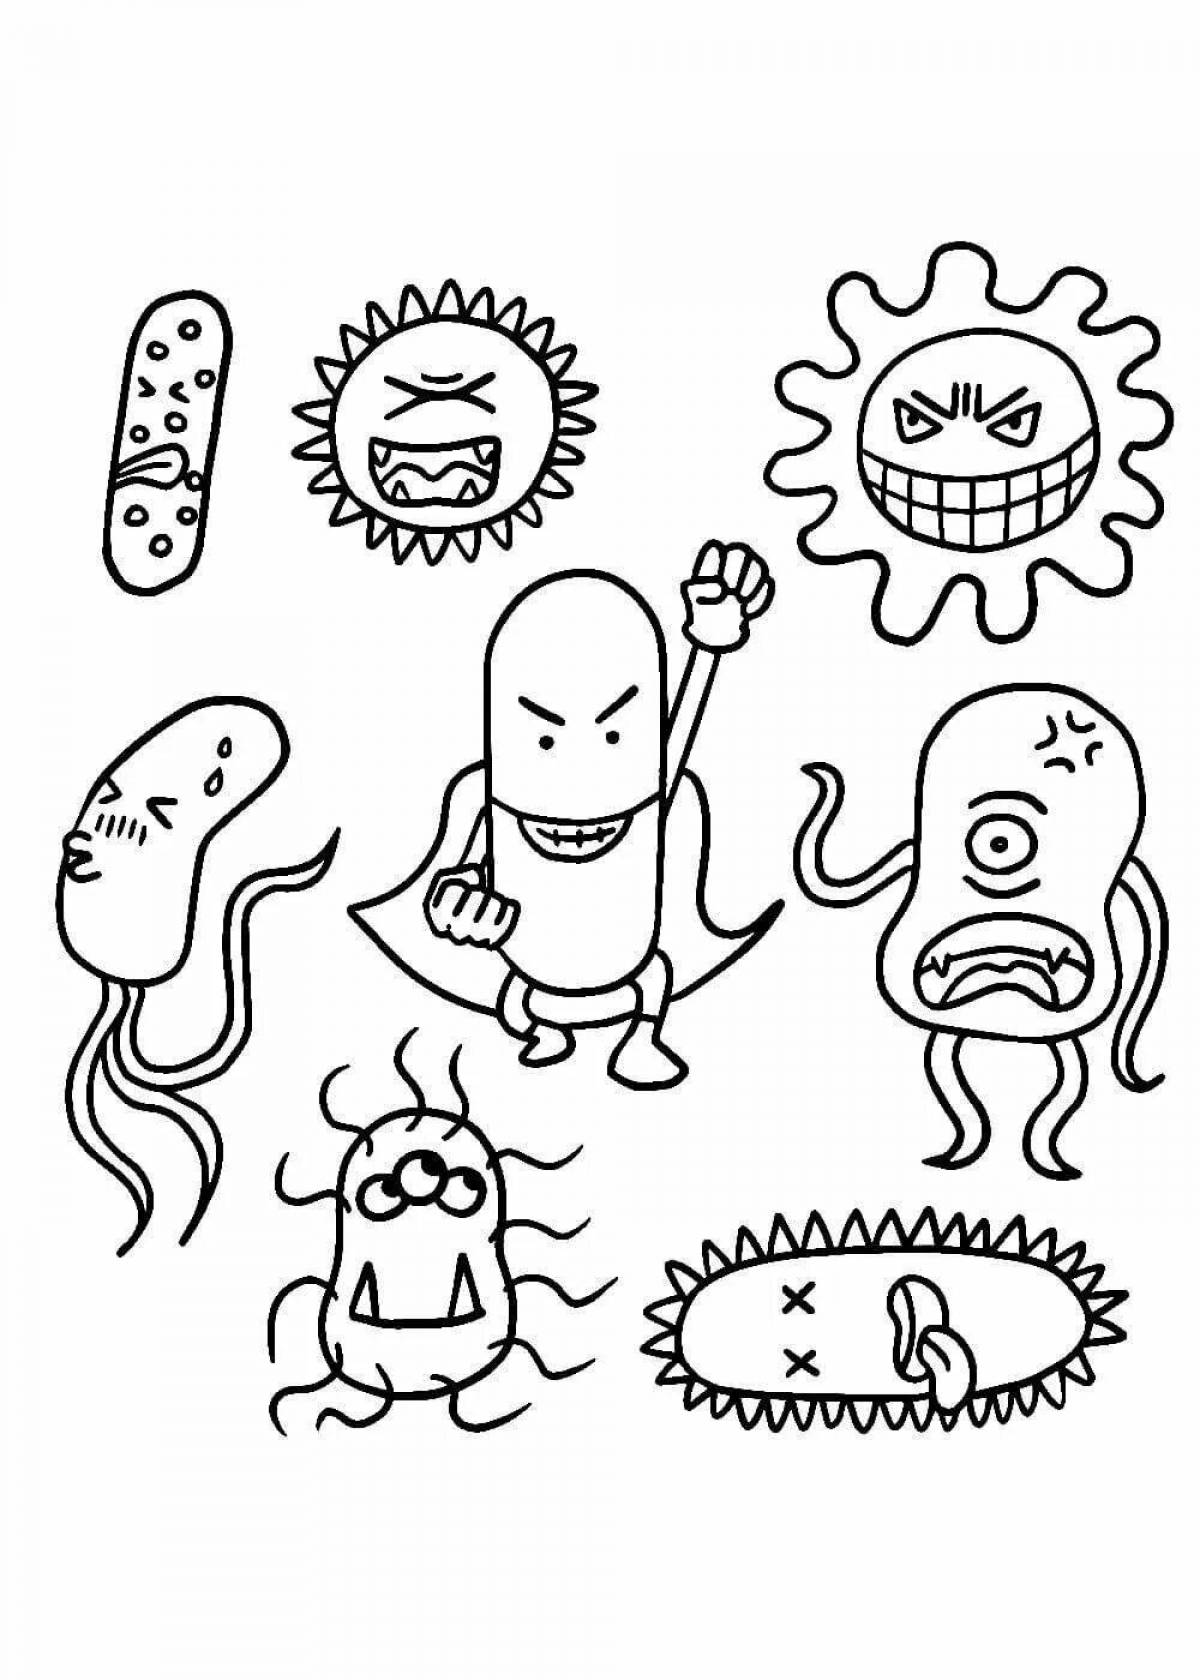 Ingenious bacteria coloring page